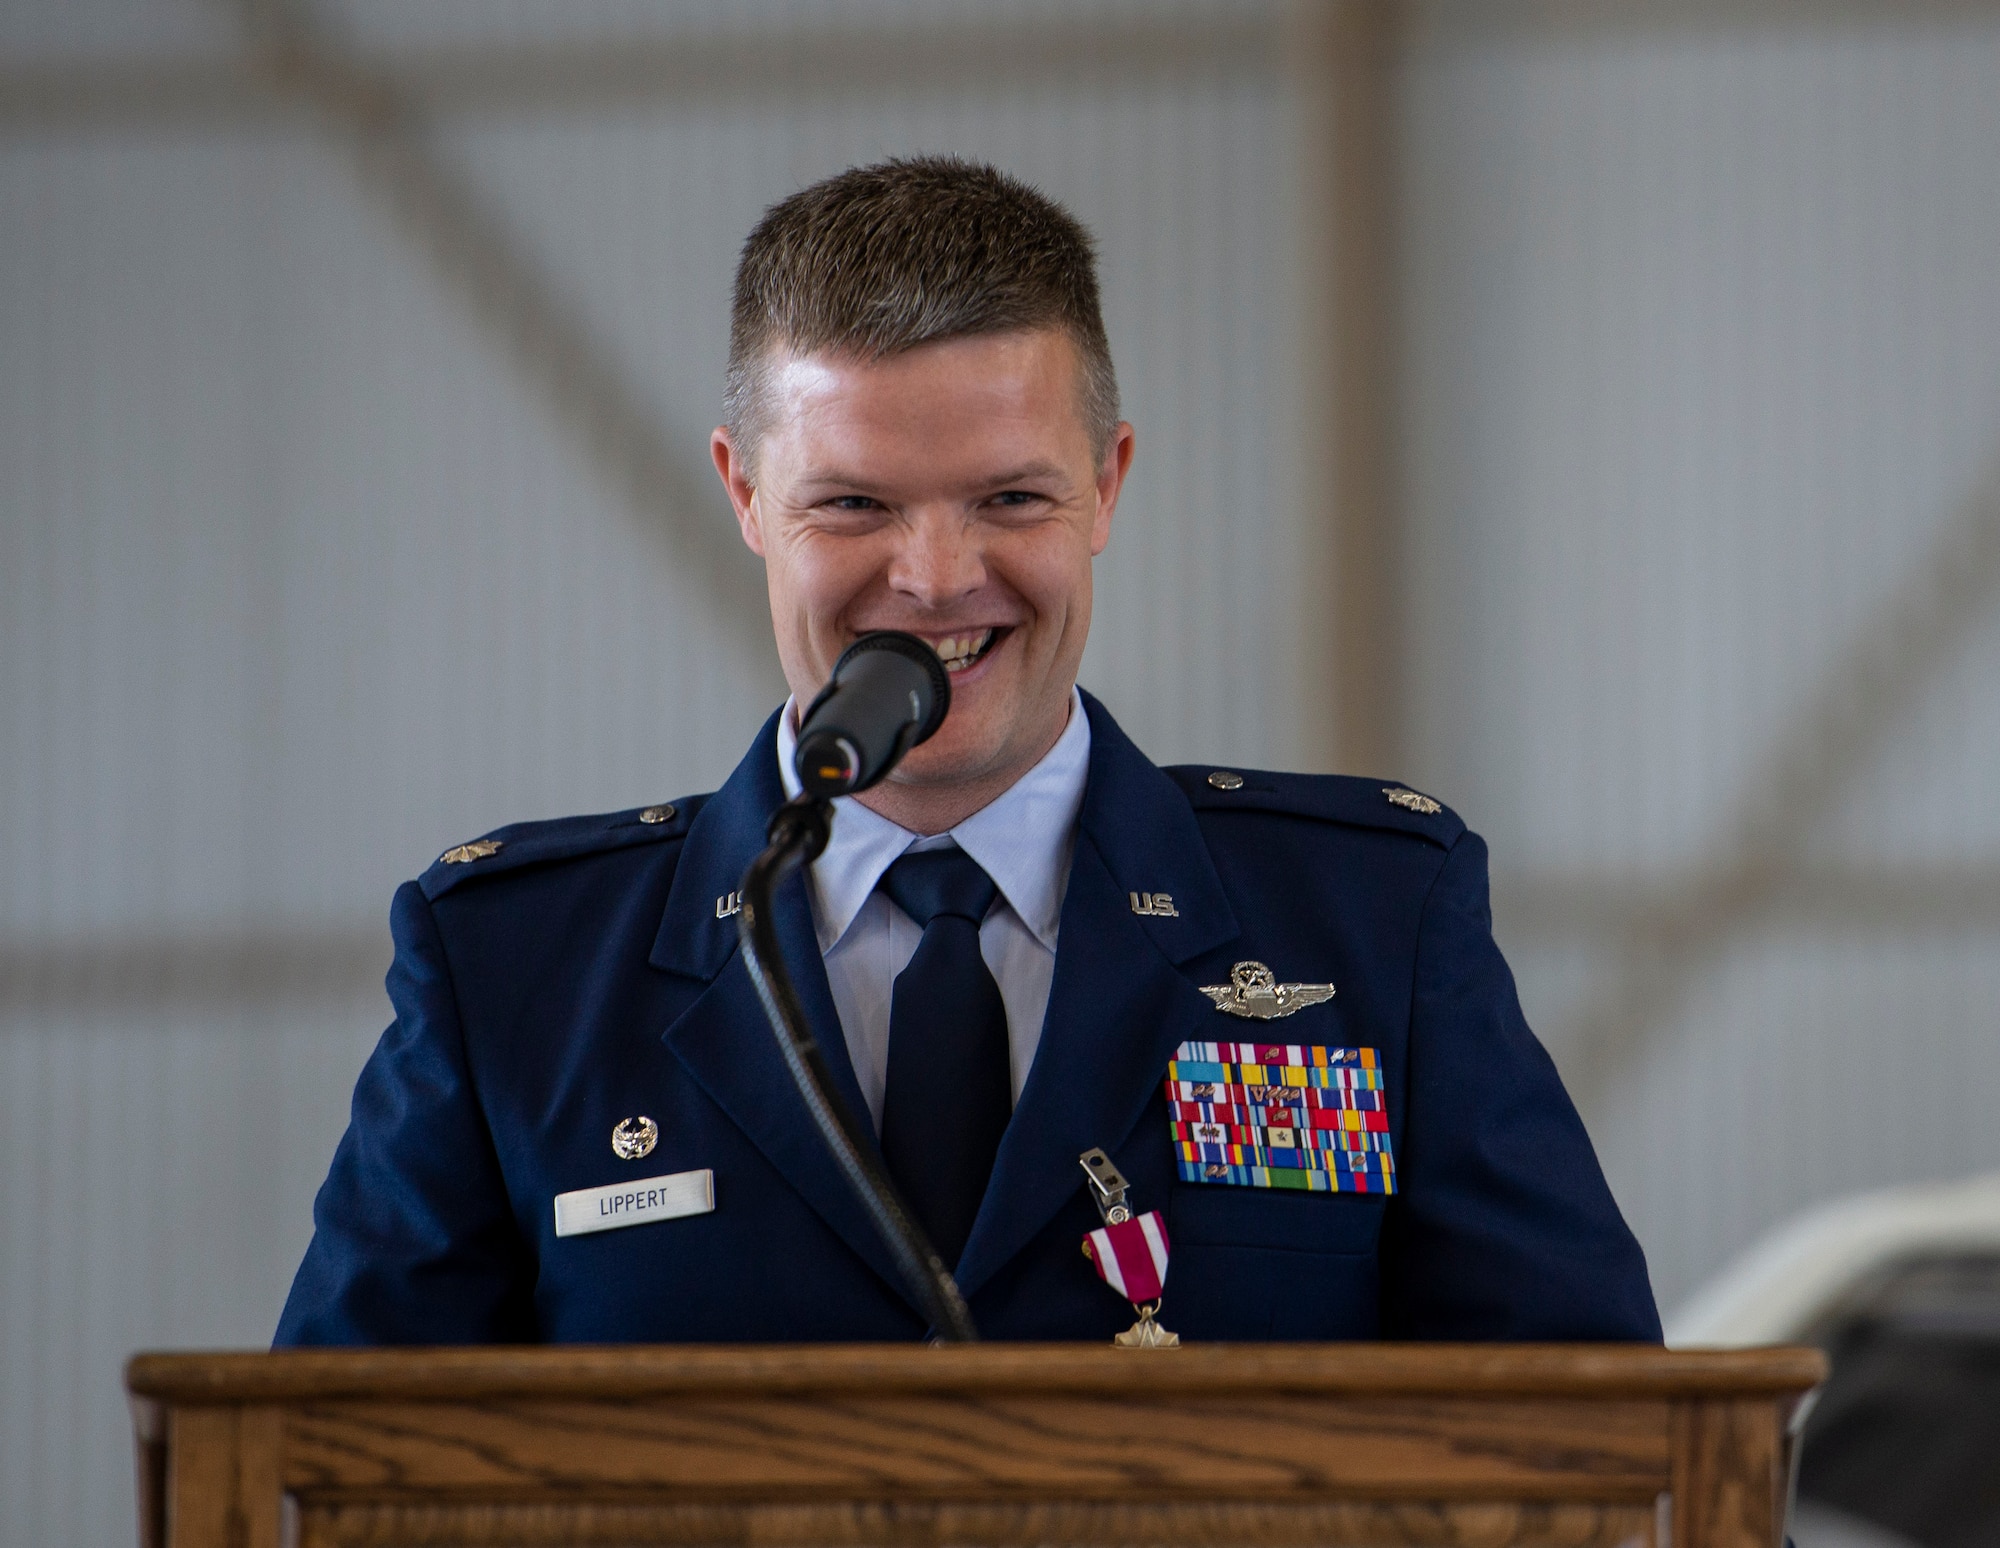 Lt. Col. Royce Lippert, 457th Airlift Squadron commander, speaks during the 457th AS inactivation ceremony at Joint Base Andrews, Maryland, June 14, 2019. Until June 14, the 457th AS flew distinguished visitor, medical evacuation, and Mission Capable missions throughout the western hemisphere. (U.S. Air Force photo by Senior Airman Chad Gorecki)